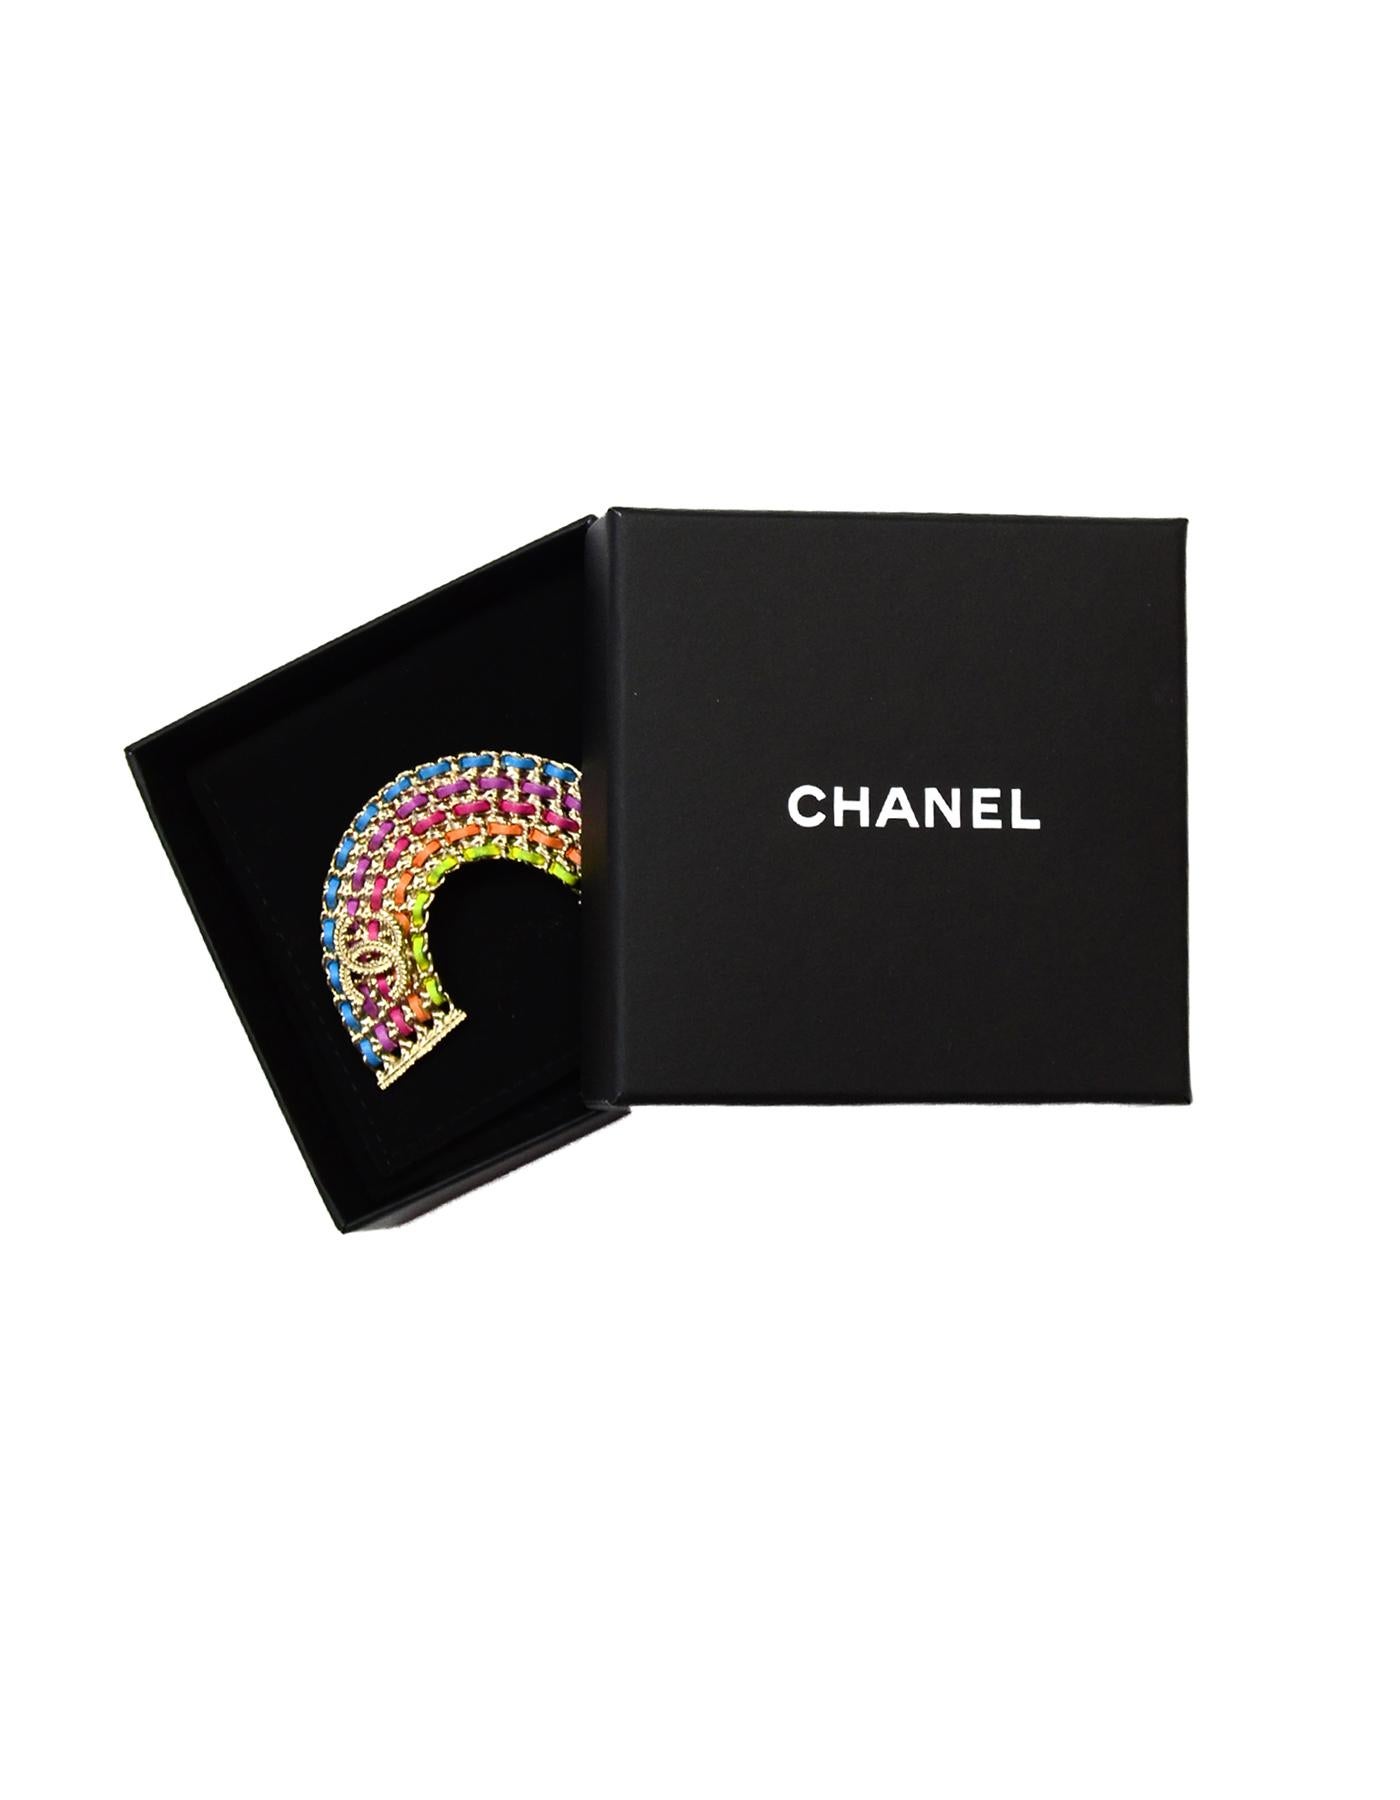 Chanel Leather Laced Chain Rainbow CC Brooch Pin W/ Box, Pouch

Made In:  Italy
Year of Production: 2018
Color: Rainbow- green/yellow, orange, pink, purple, blue 
Materials: Metal and leather 
Hallmarks:   On bottom- 